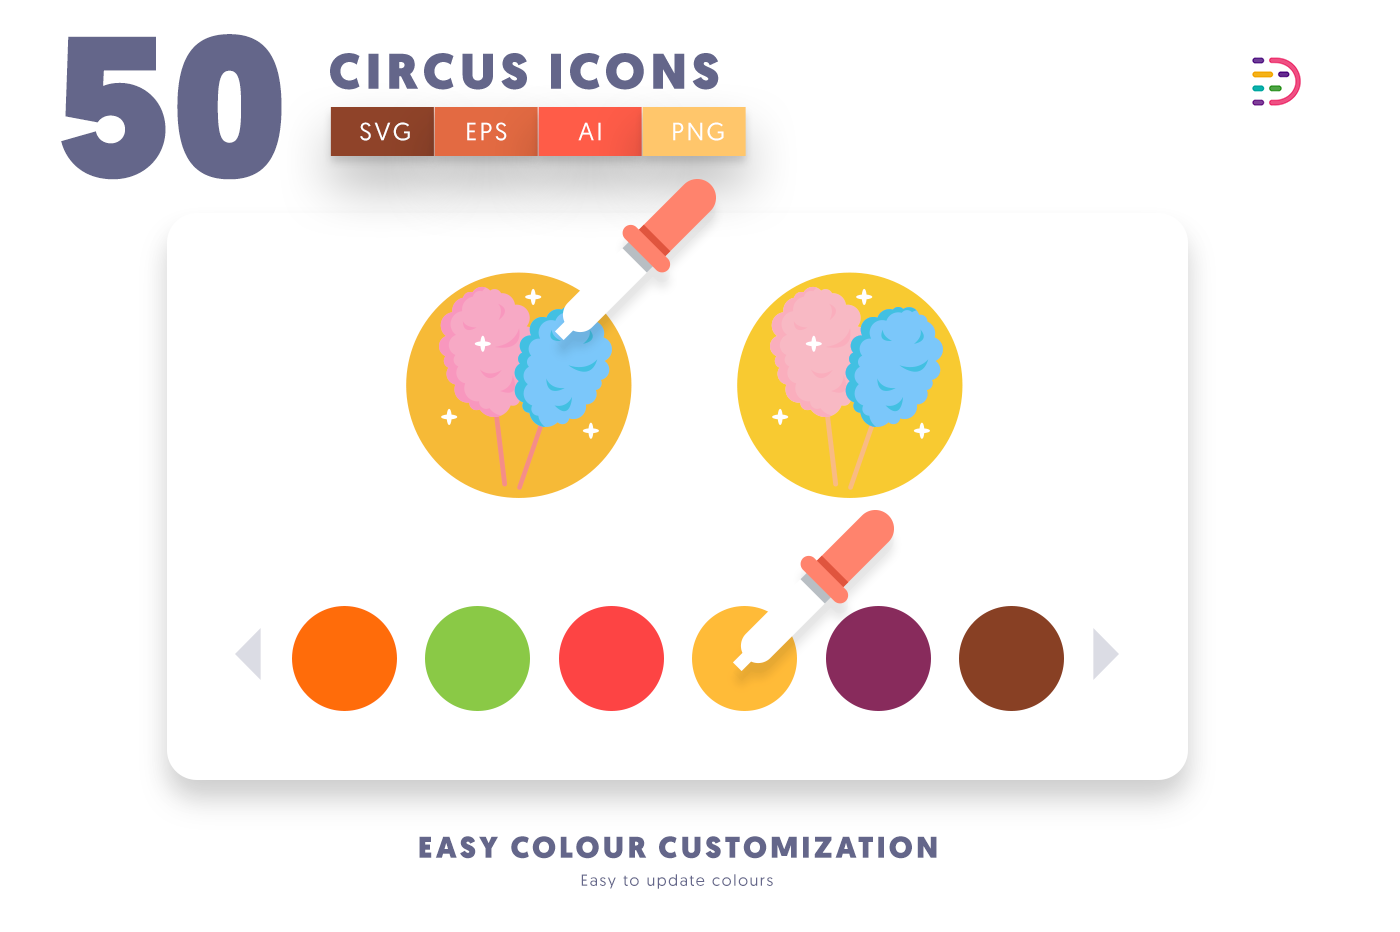 Customizable and vector 50 Circus Icons